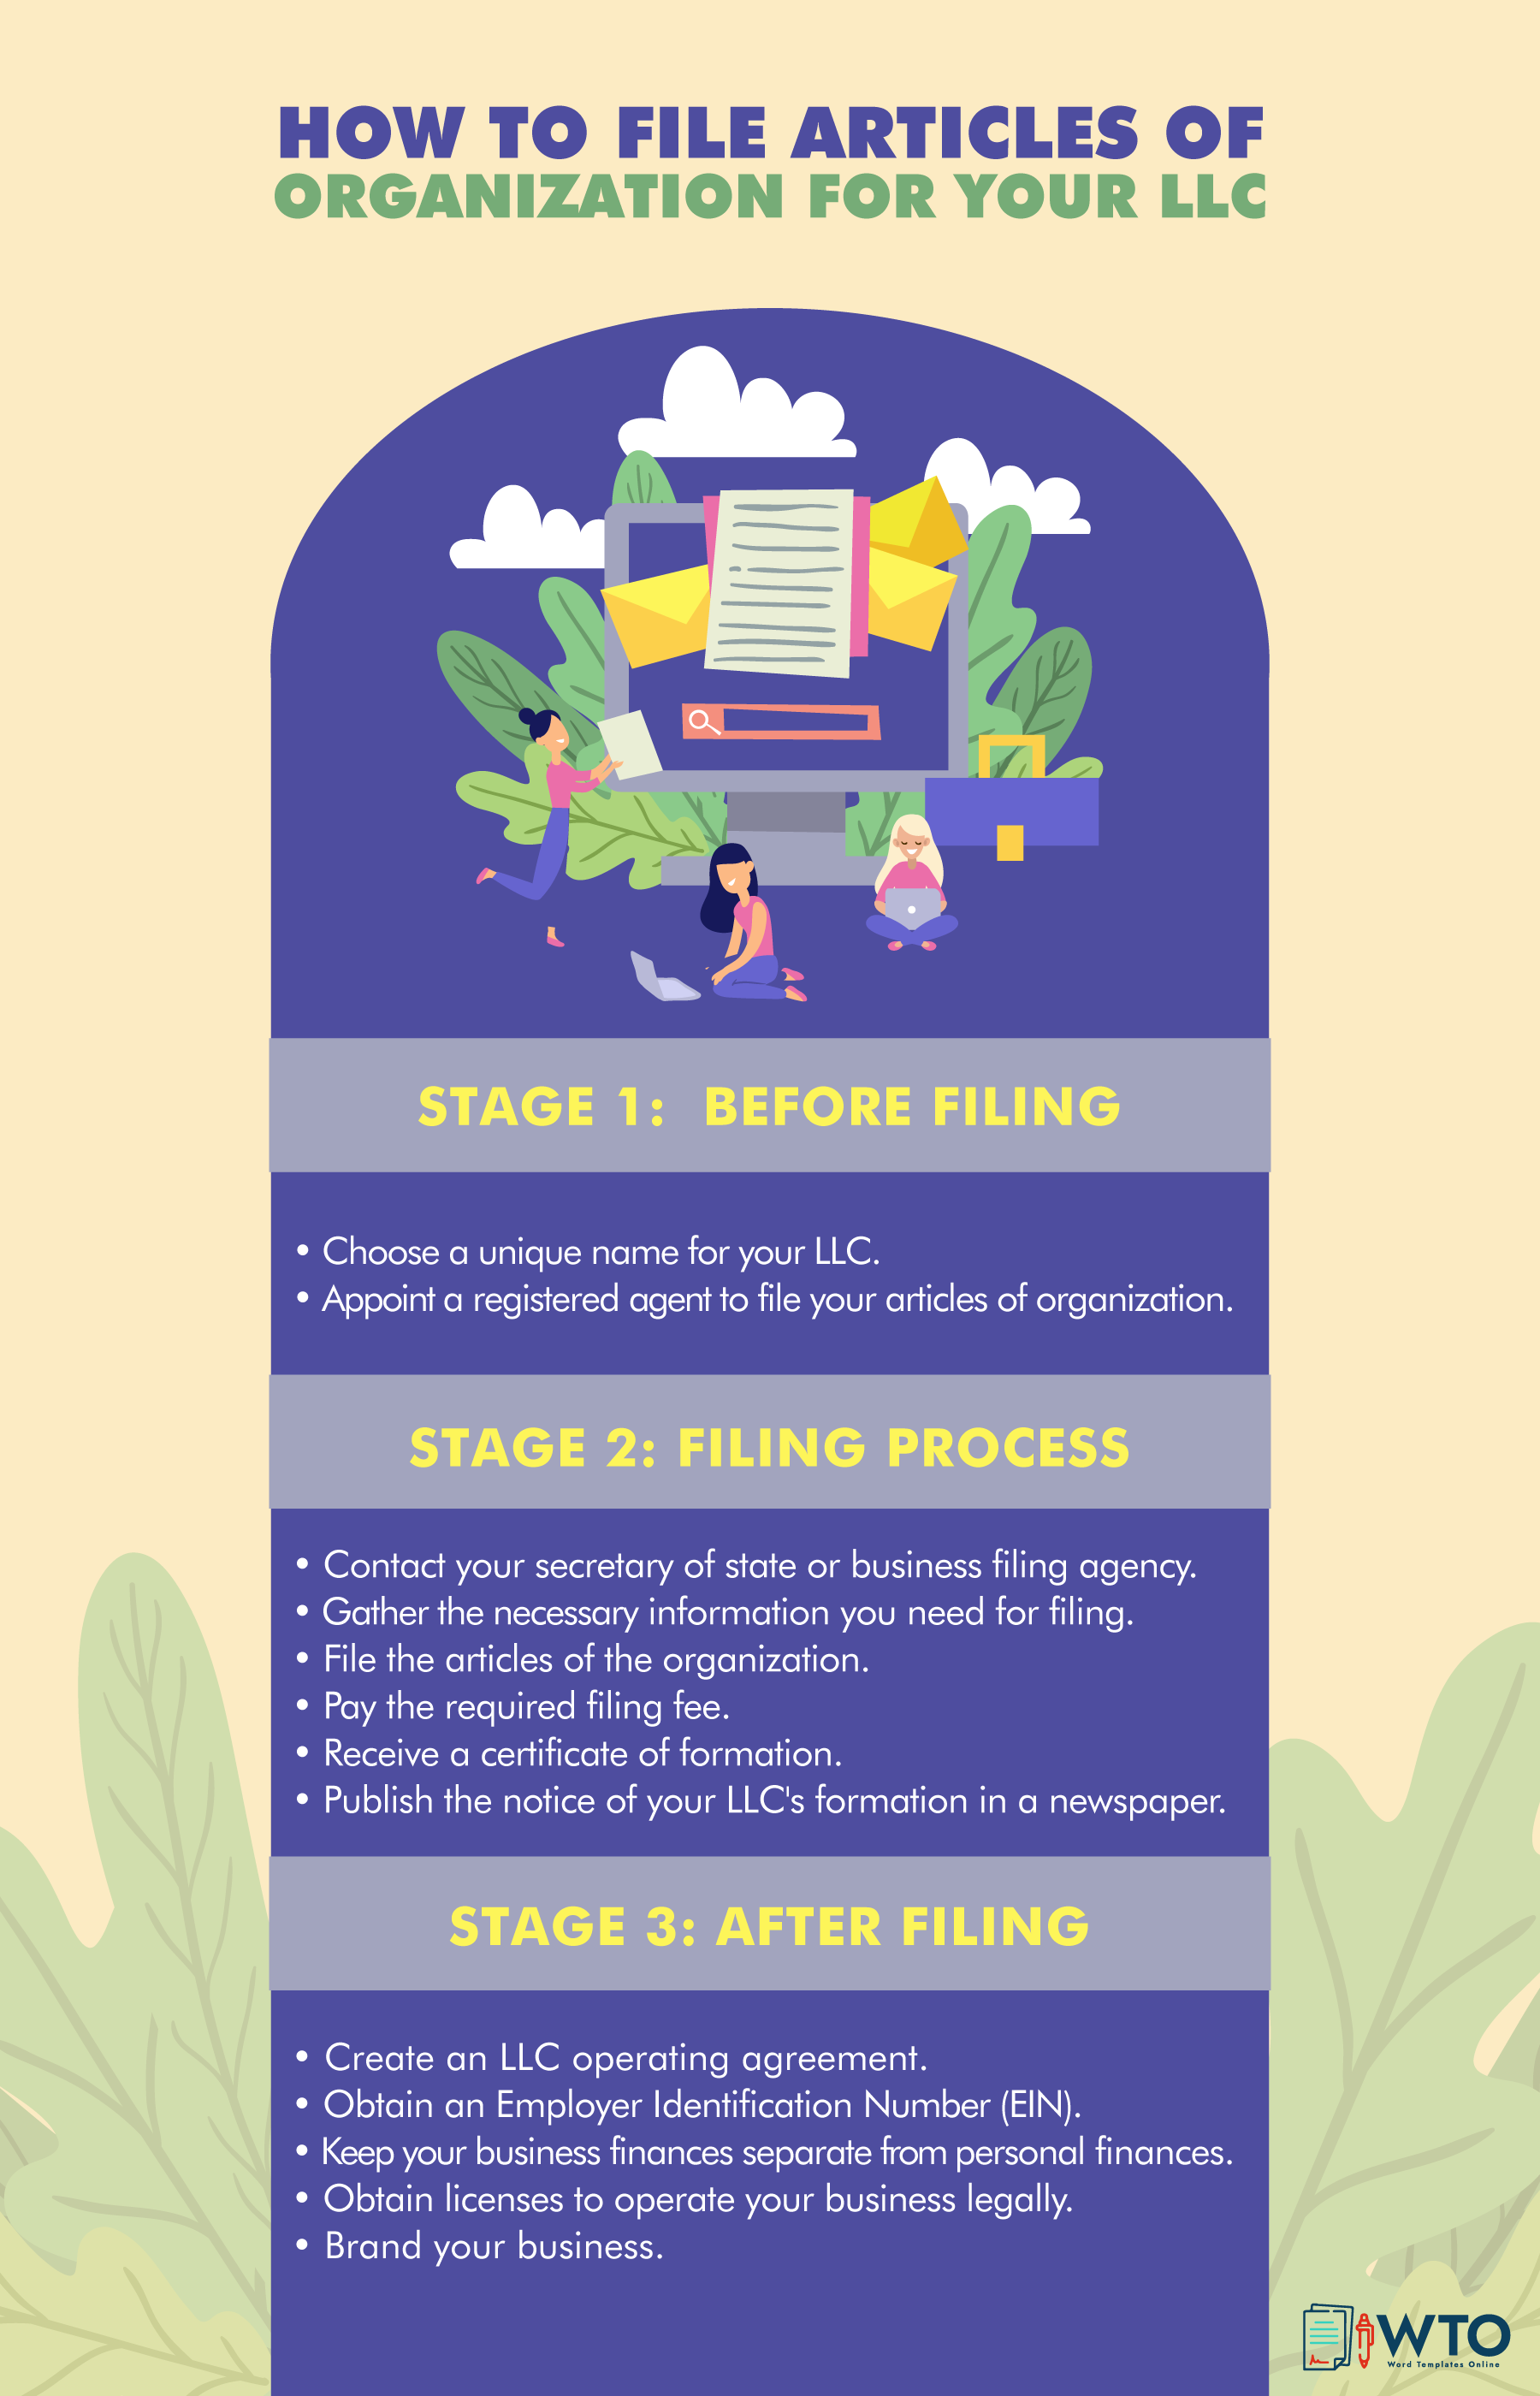 This infographic is about how to file articles for your LLC.